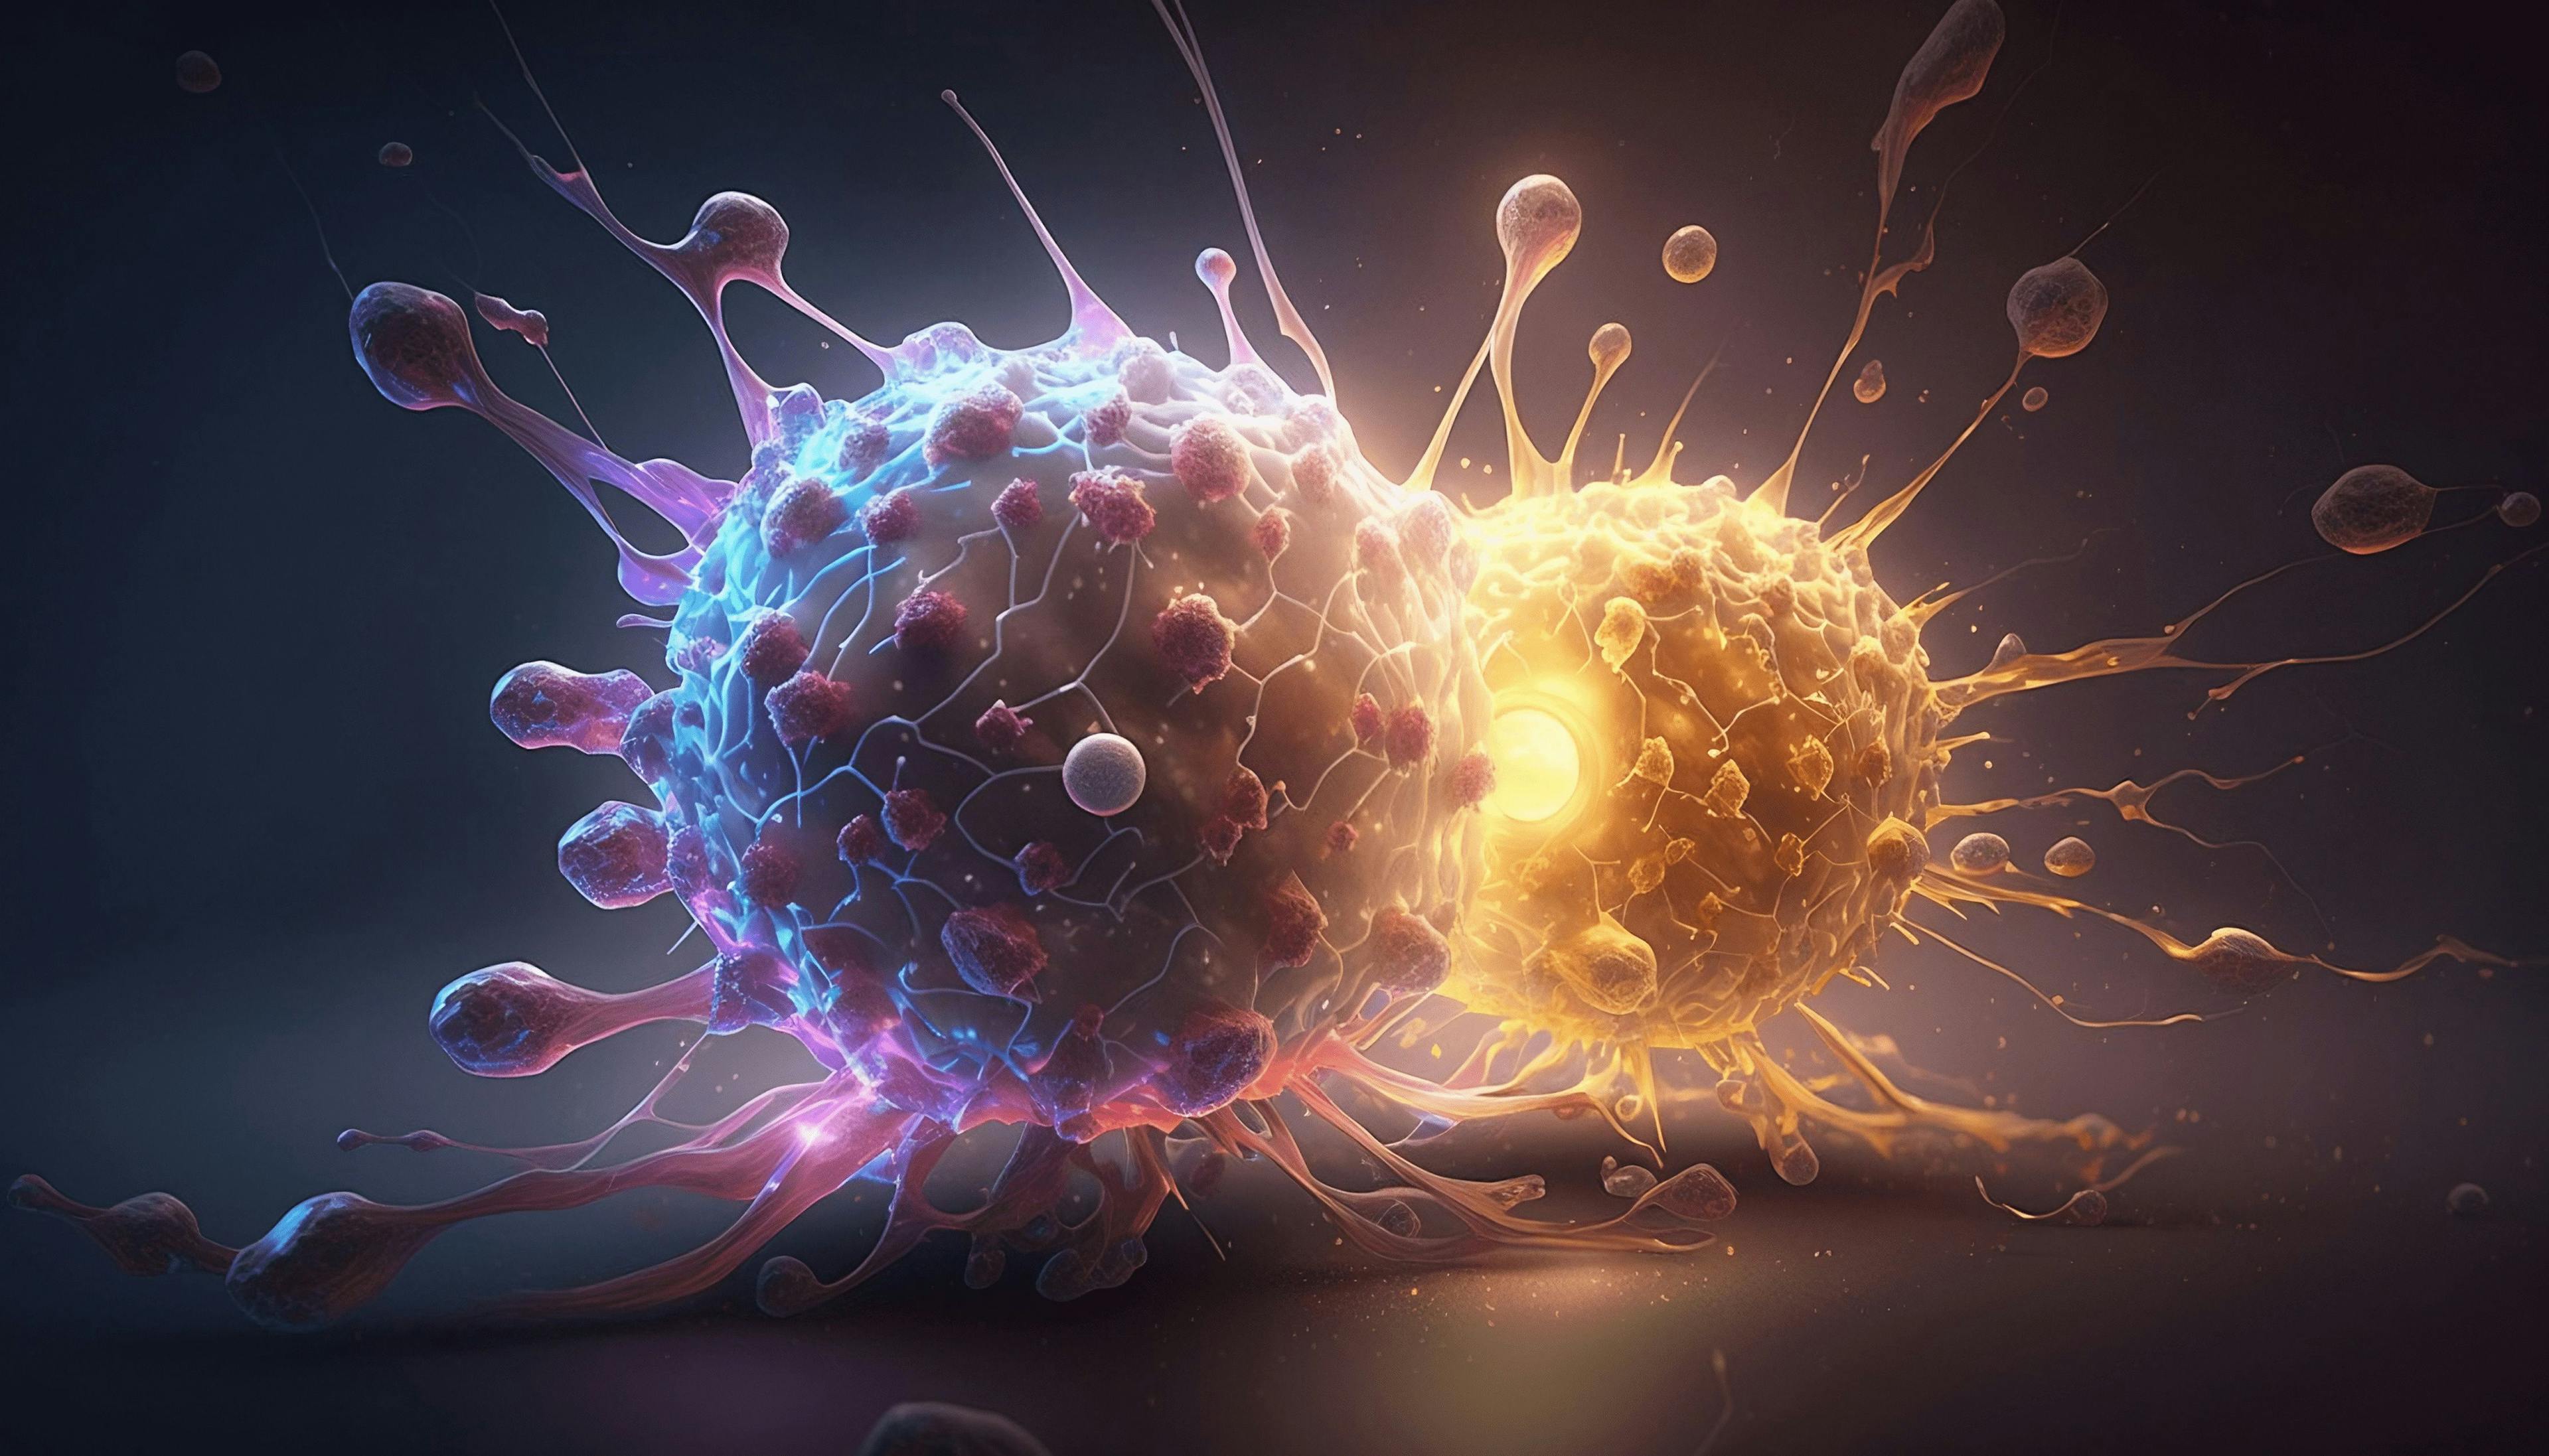 Cancer cell attacking another cell | Image Credit: © Forrest - stock.adobe.com.